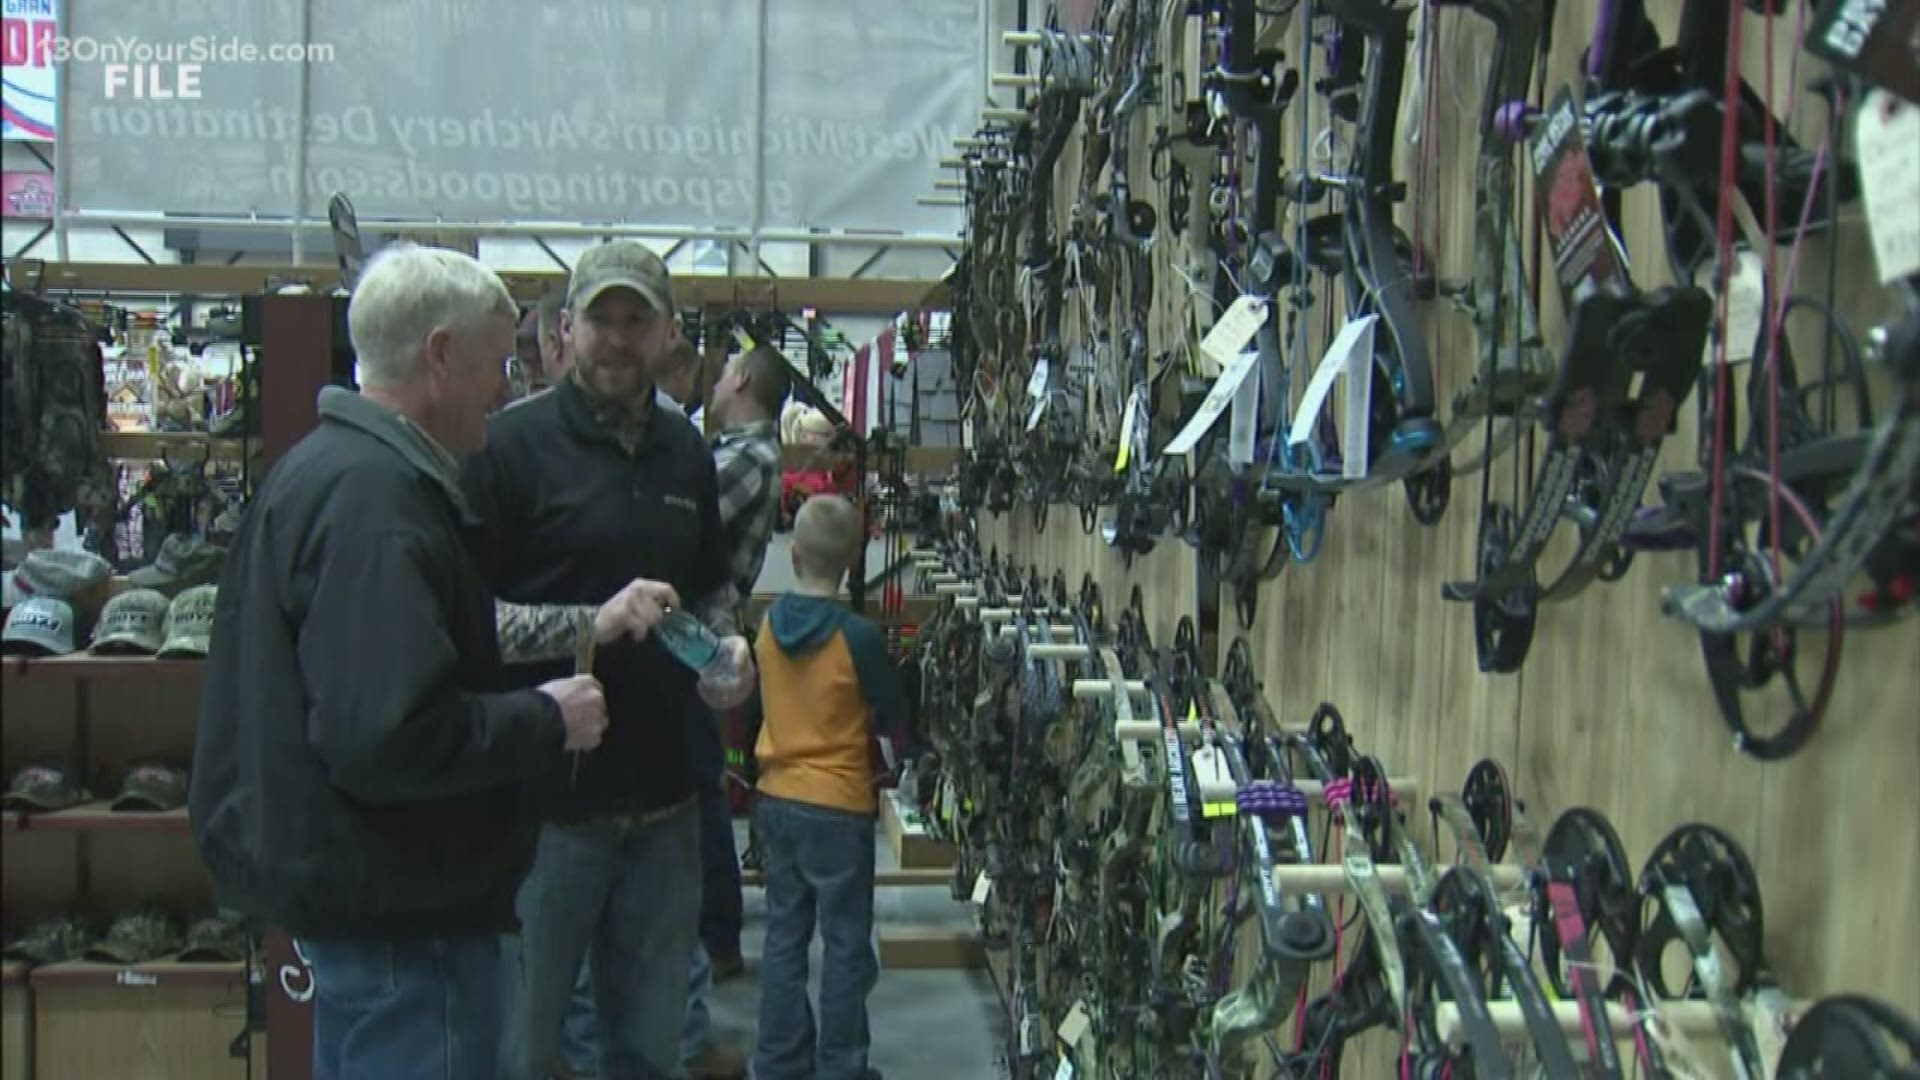 One of the country’s top hunting trade shows is coming to DeltaPlex Arena this weekend, featuring more than 350 booths.